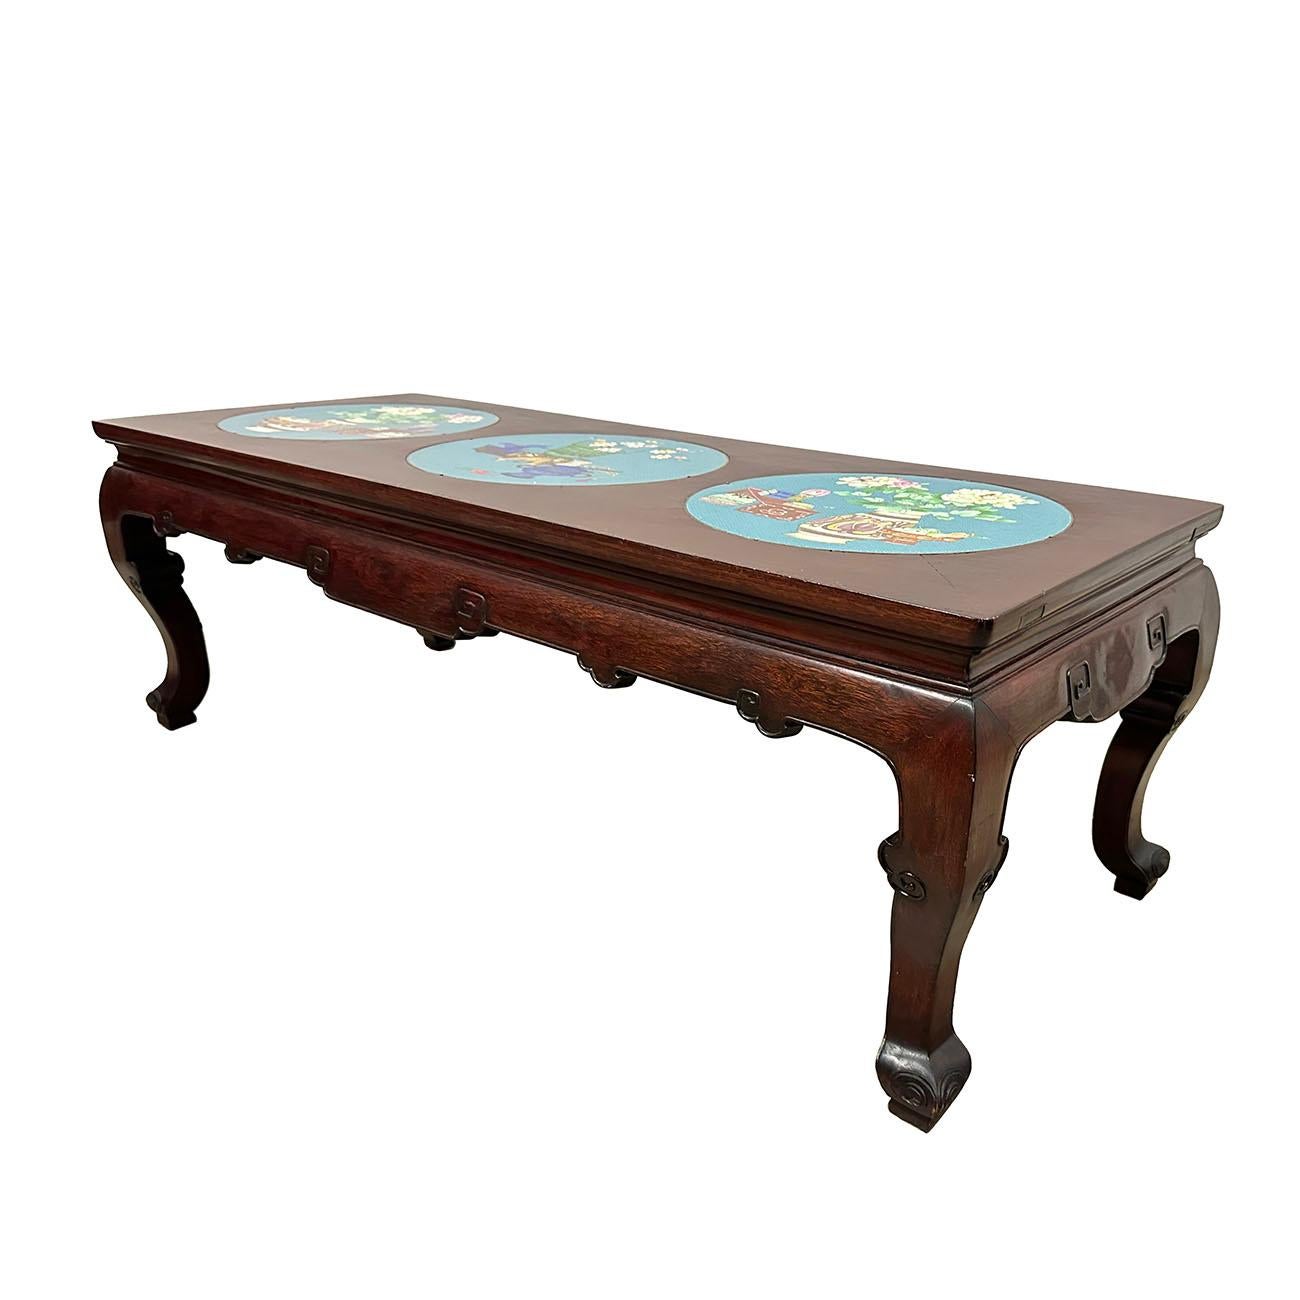 This beautiful Chinese Antique Carved Coffee Table was made from solid hardwood with some traditional carving works on the sides and three cloisonne plates inlayed on the top of the table. This table made at about early 1900's using solid hard wood